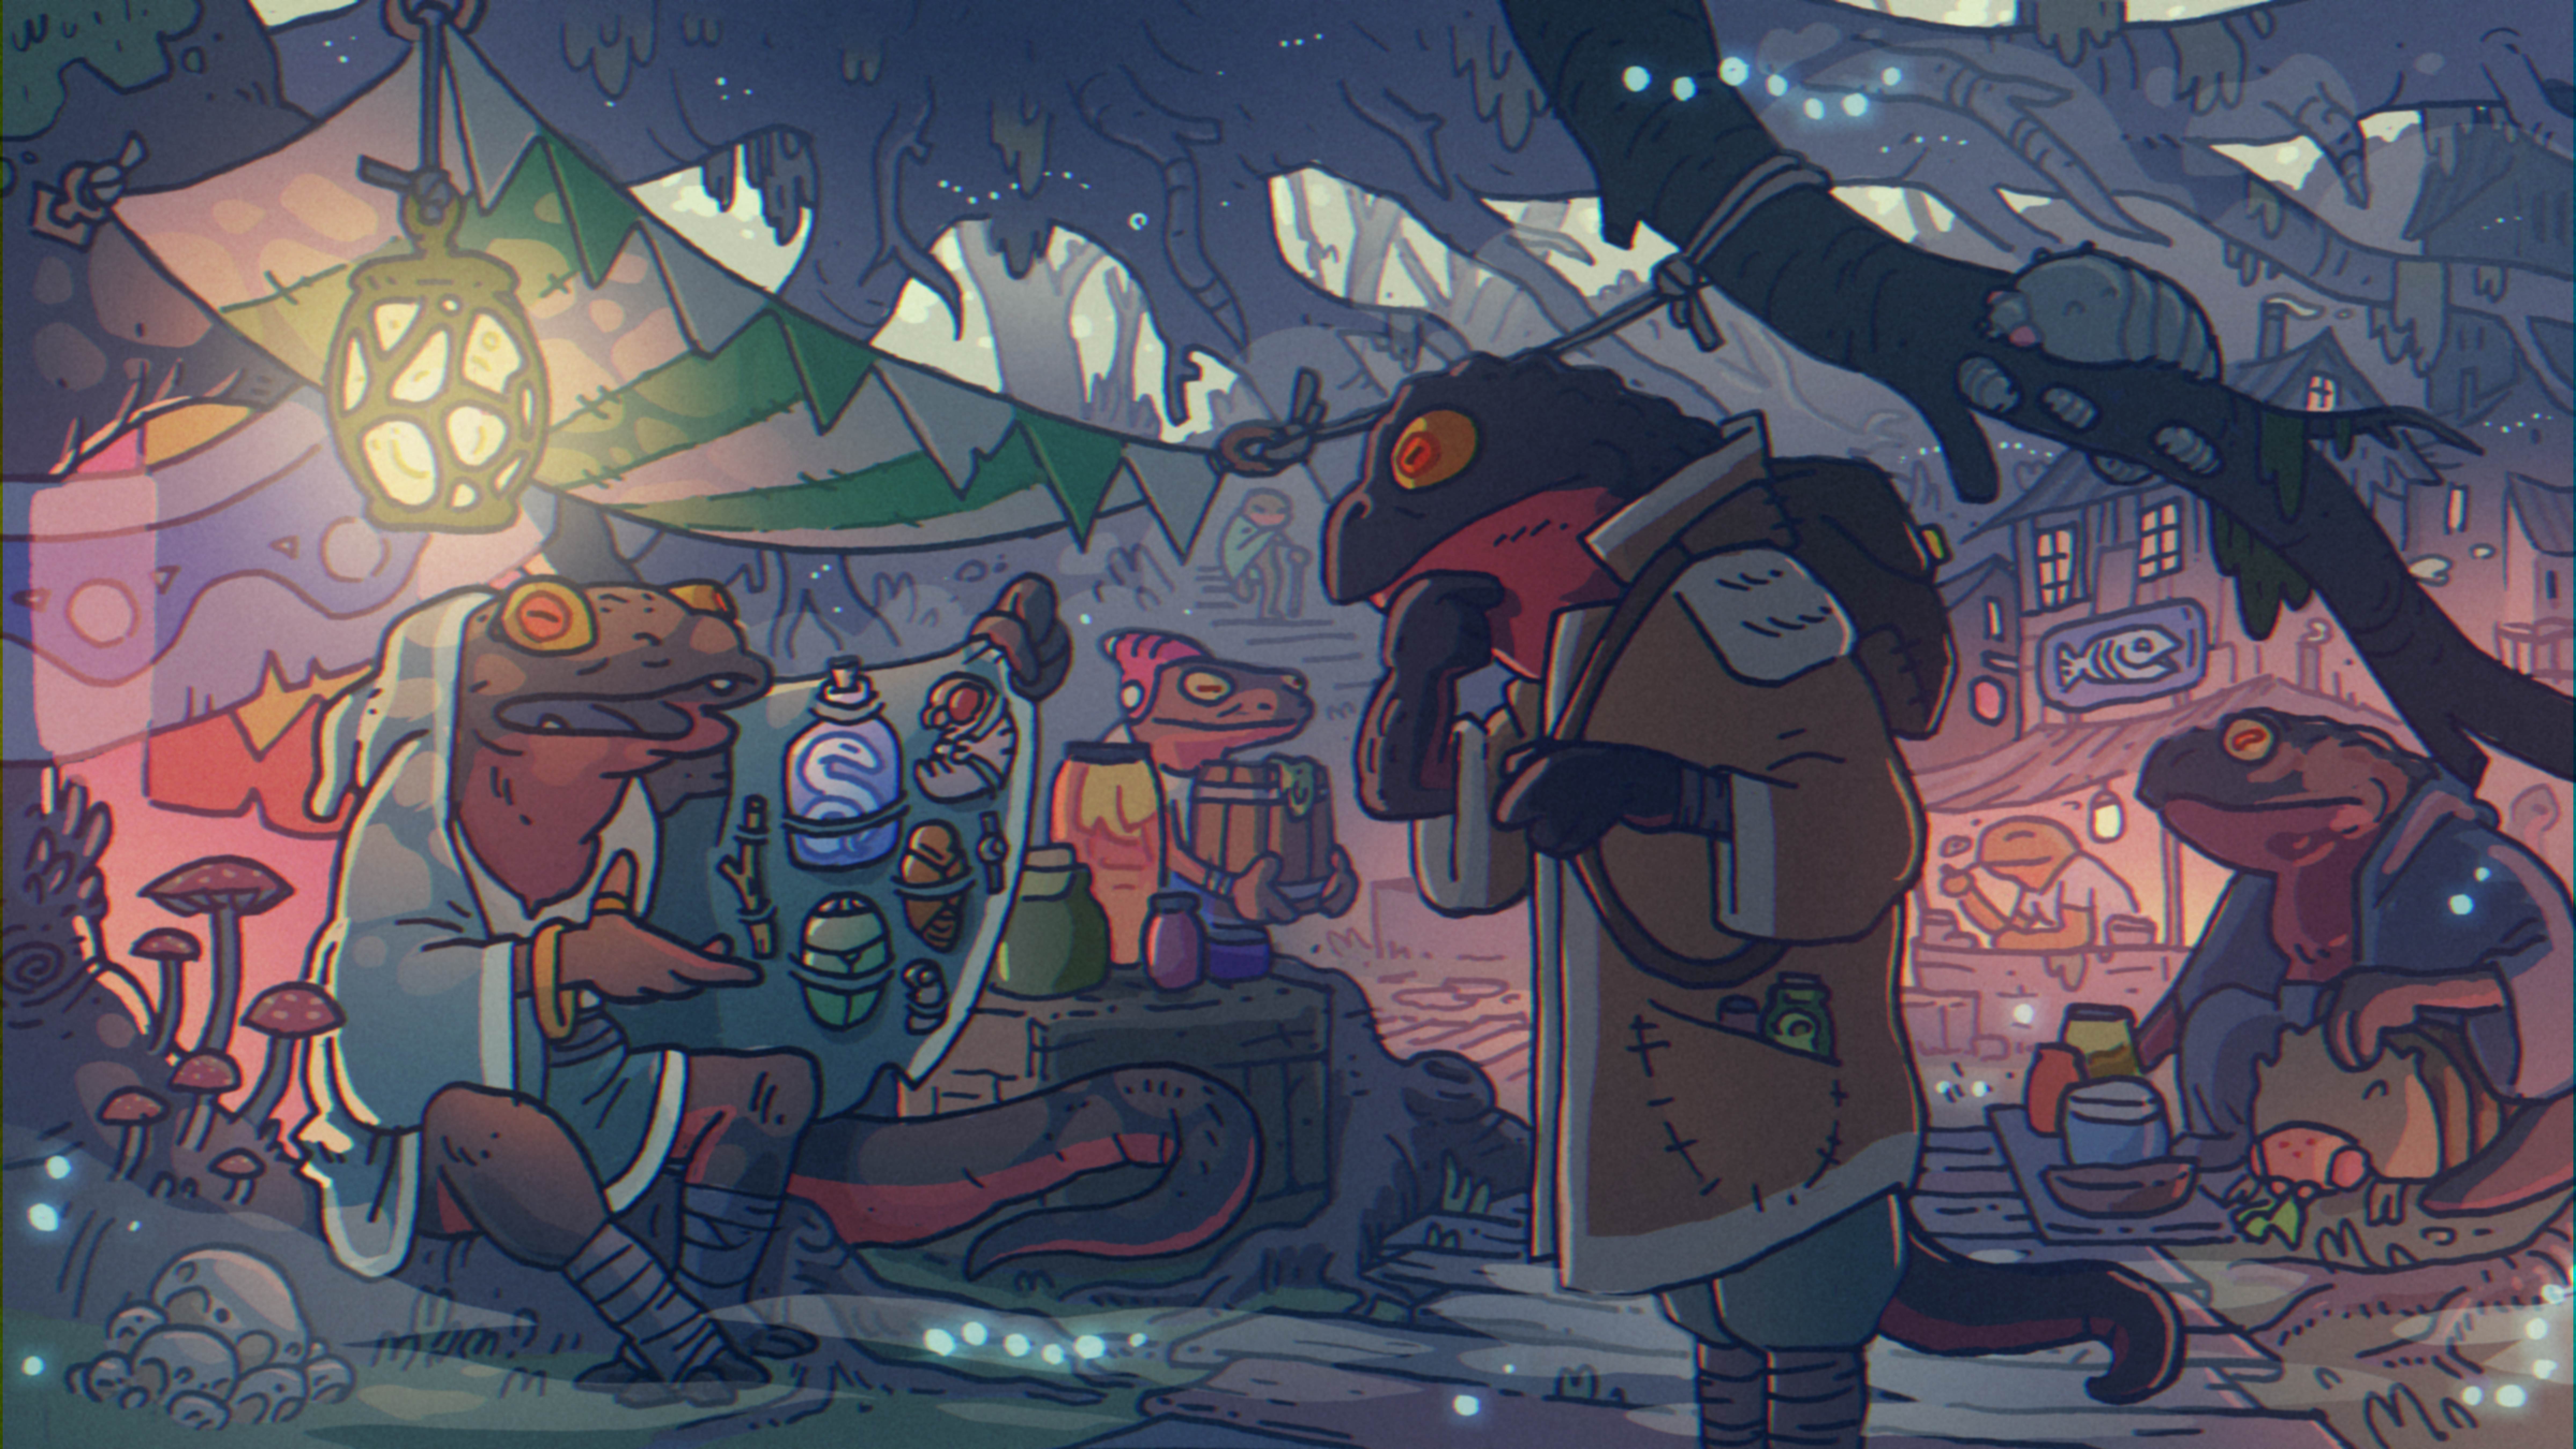 A newt night market, with potions, illegal artifacts and shady characters